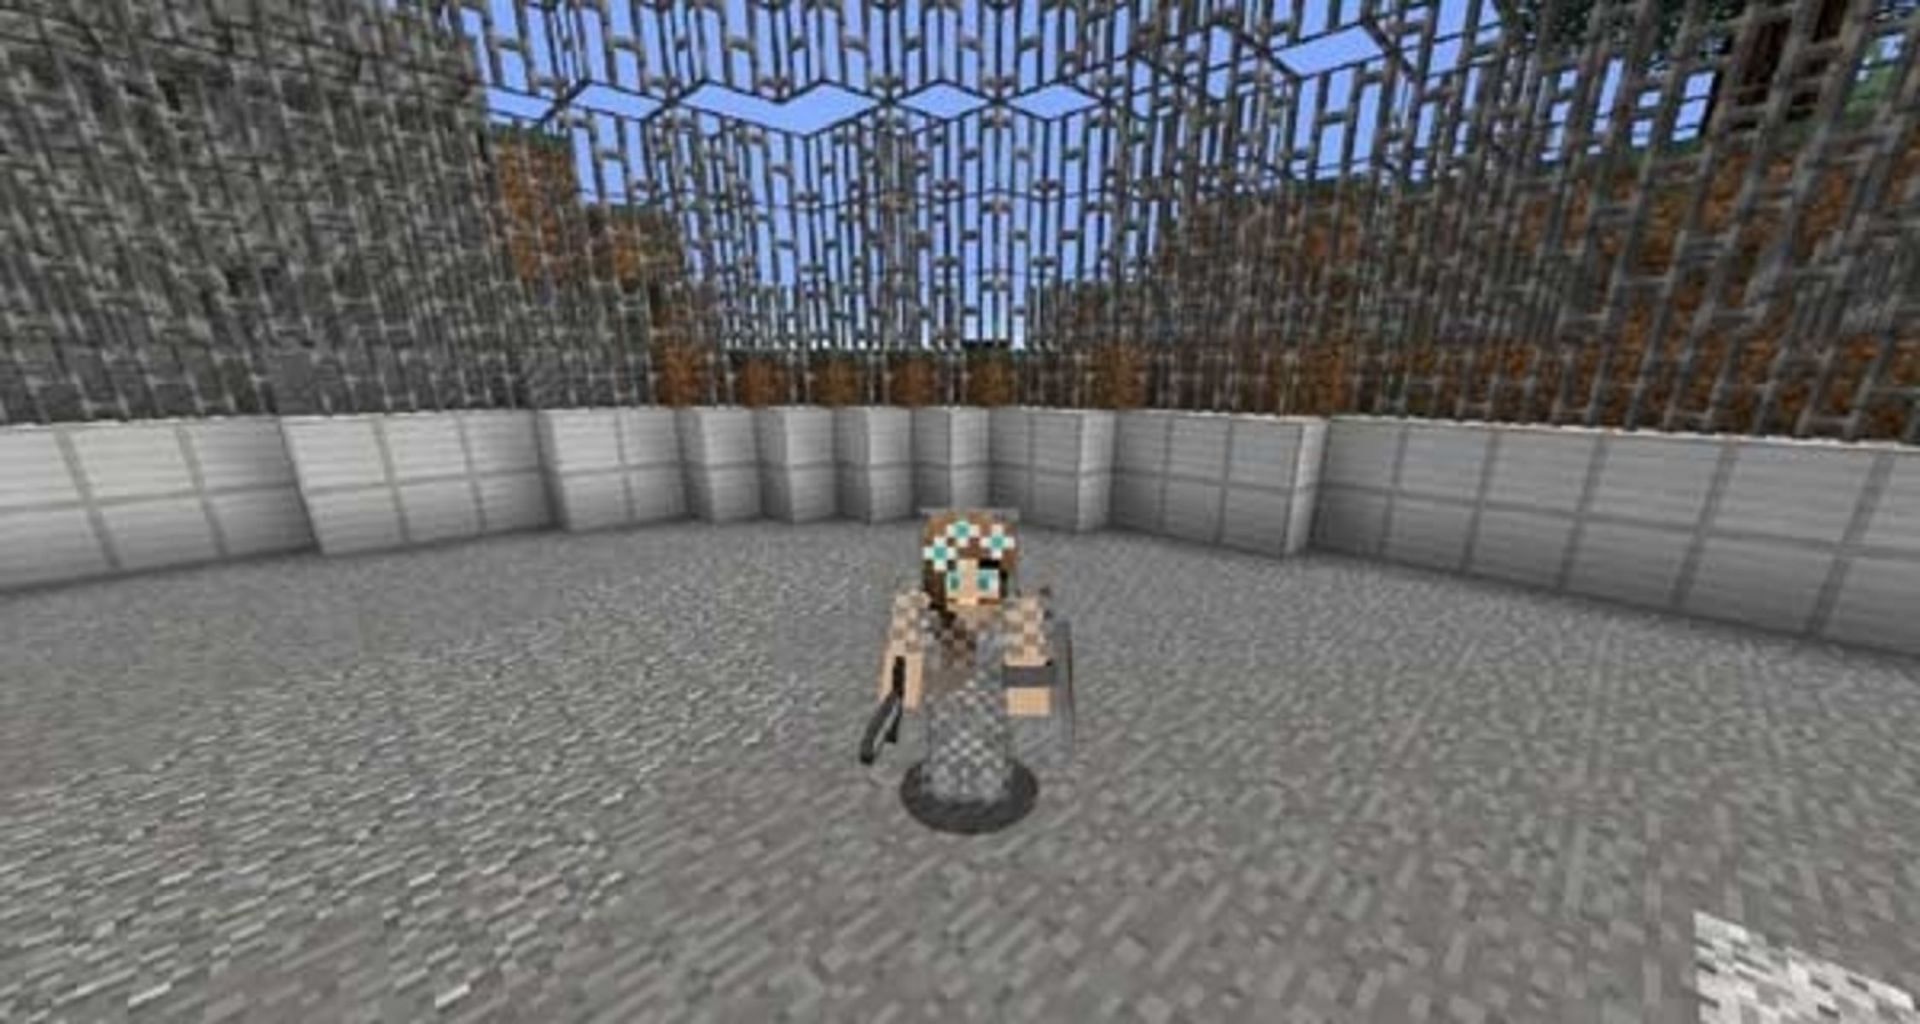 Thunderdome features a PvP arena where players can battle to the last one standing (Image via Mojang/Tynker)